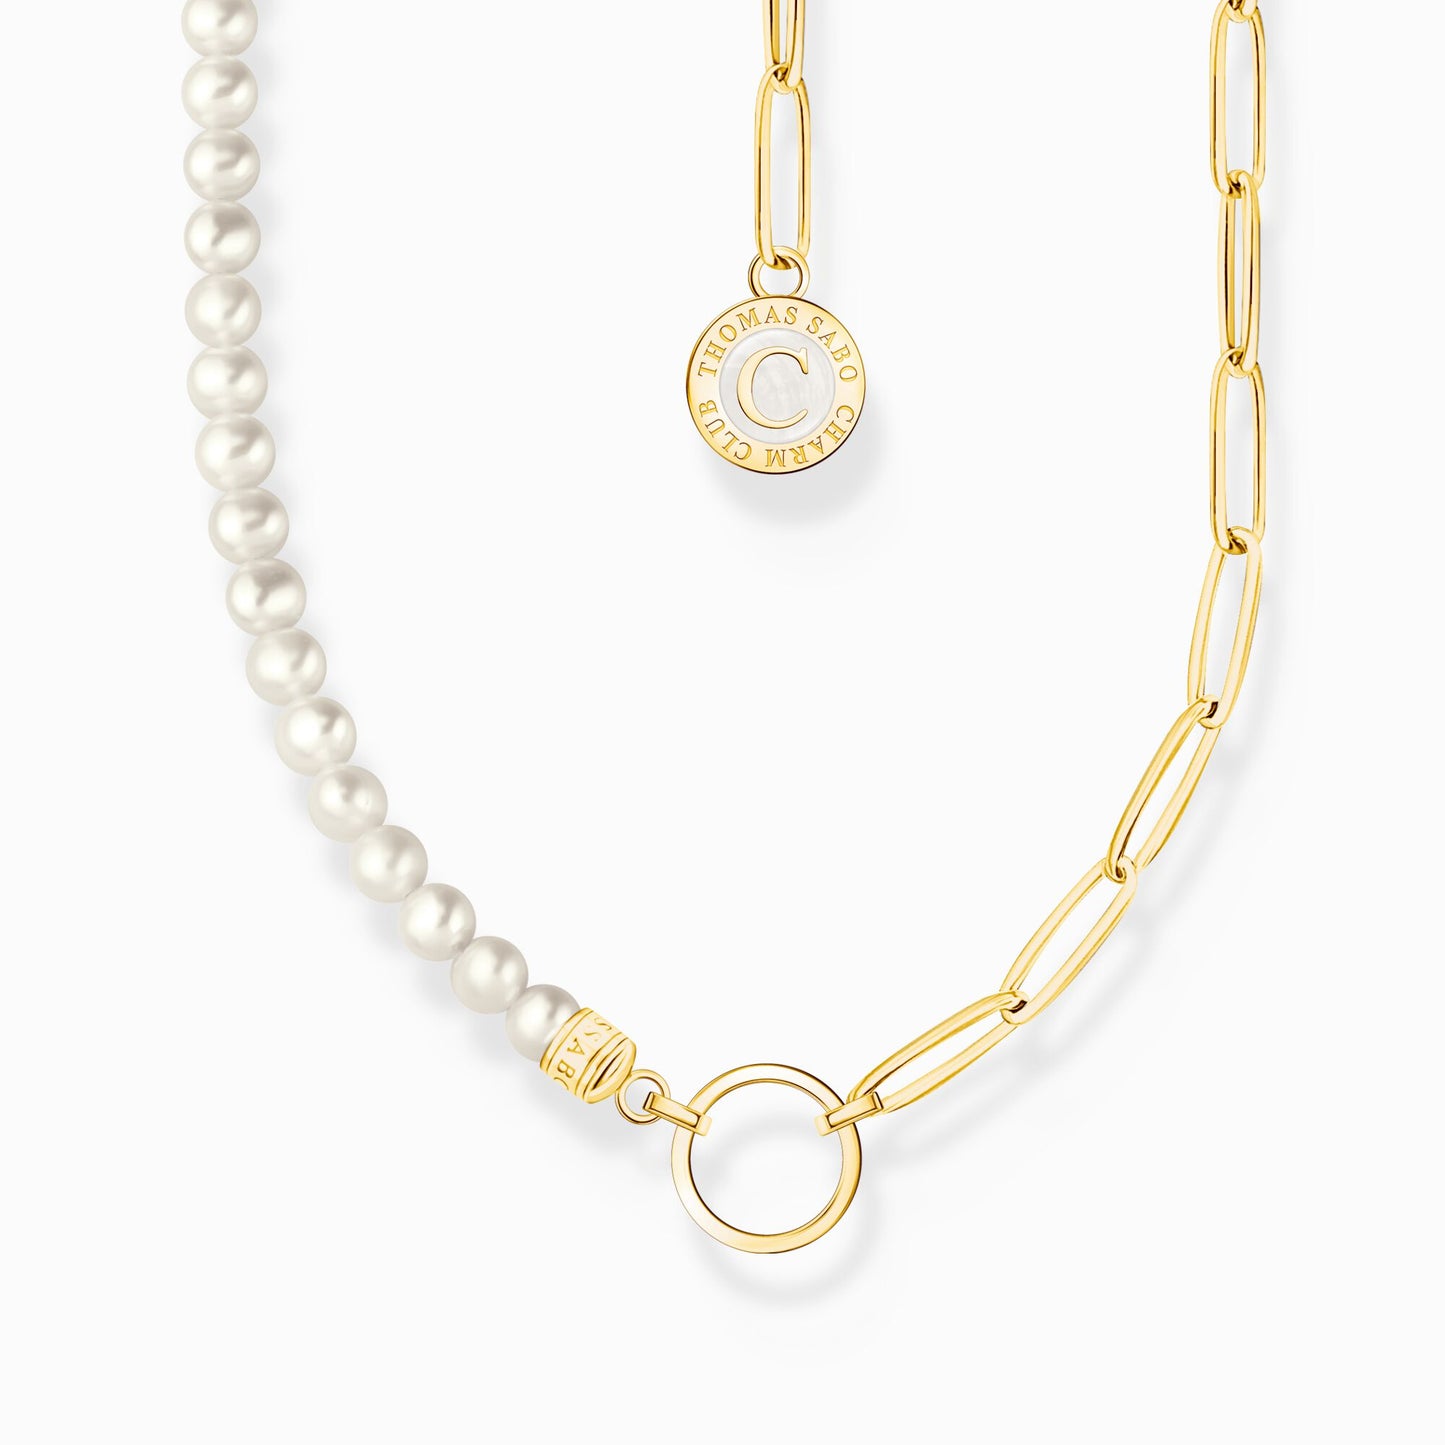 Thomas Sabo Member Charm Necklace With White Pearls And Charmista Disc Gold Plated KE2189-430-14-L45